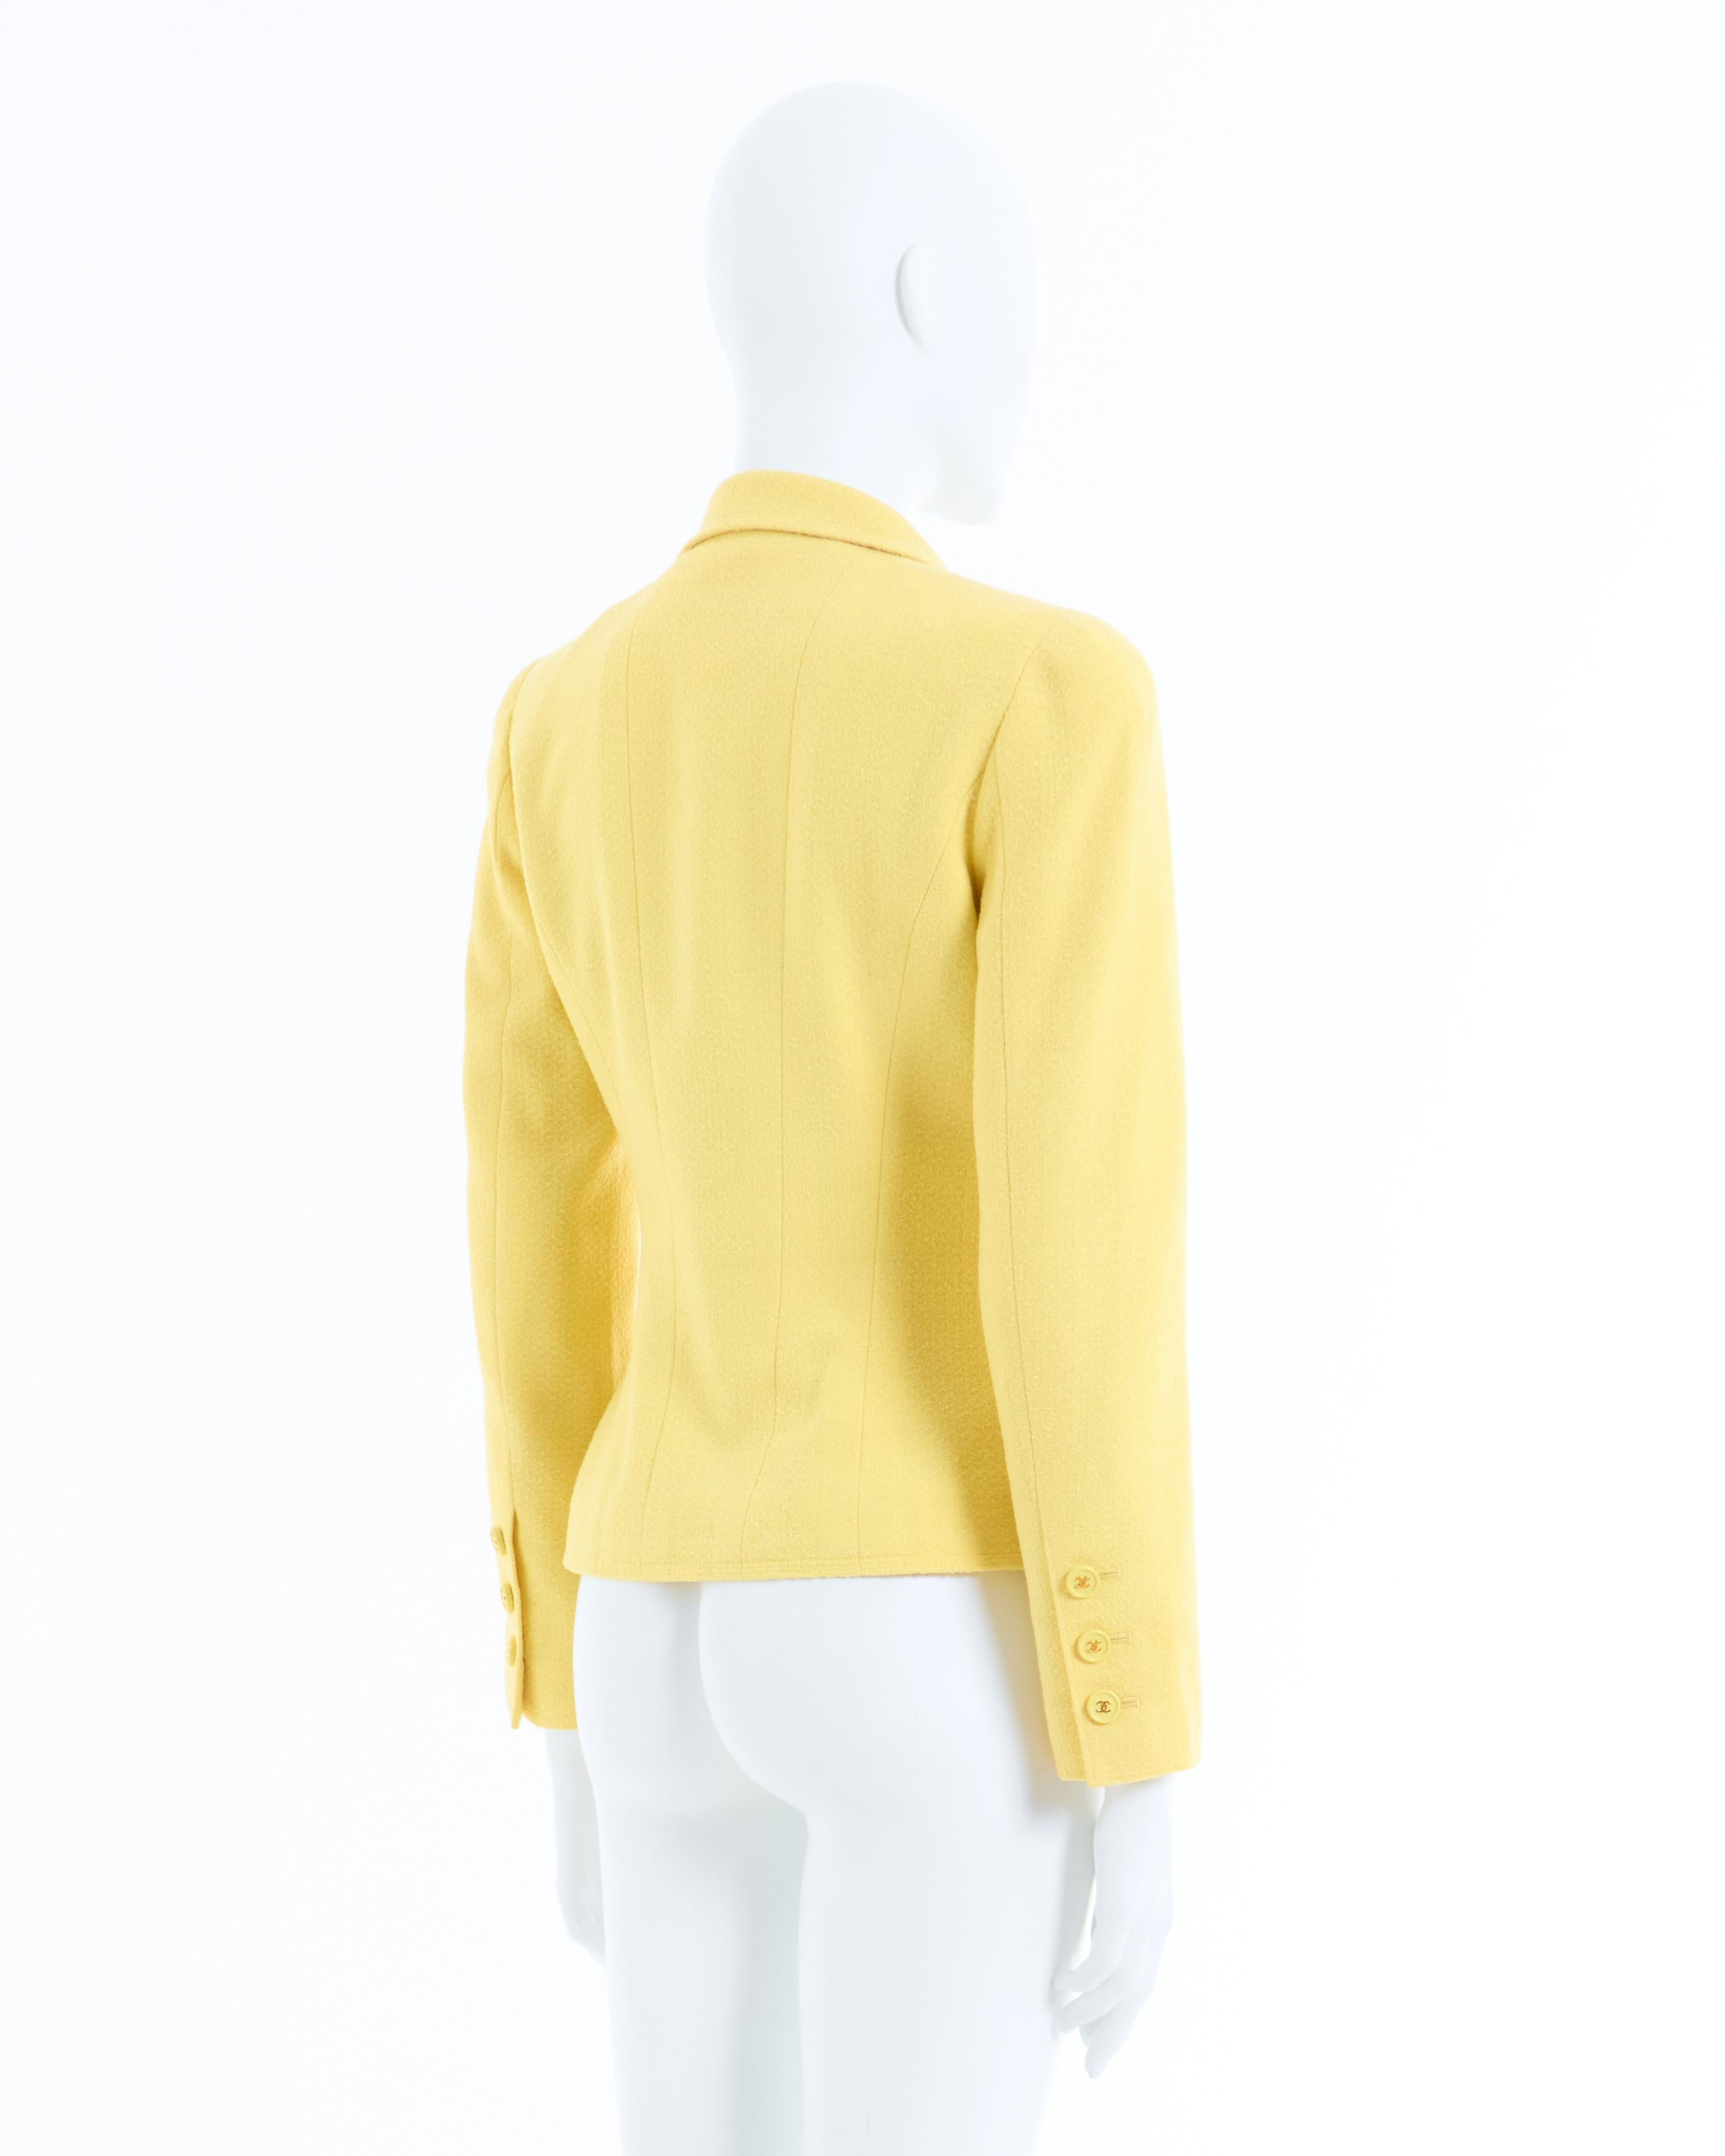 Women's Chanel by Karl Lagerfeld S/S 1997 Yellow CC logo fitted jacket  For Sale